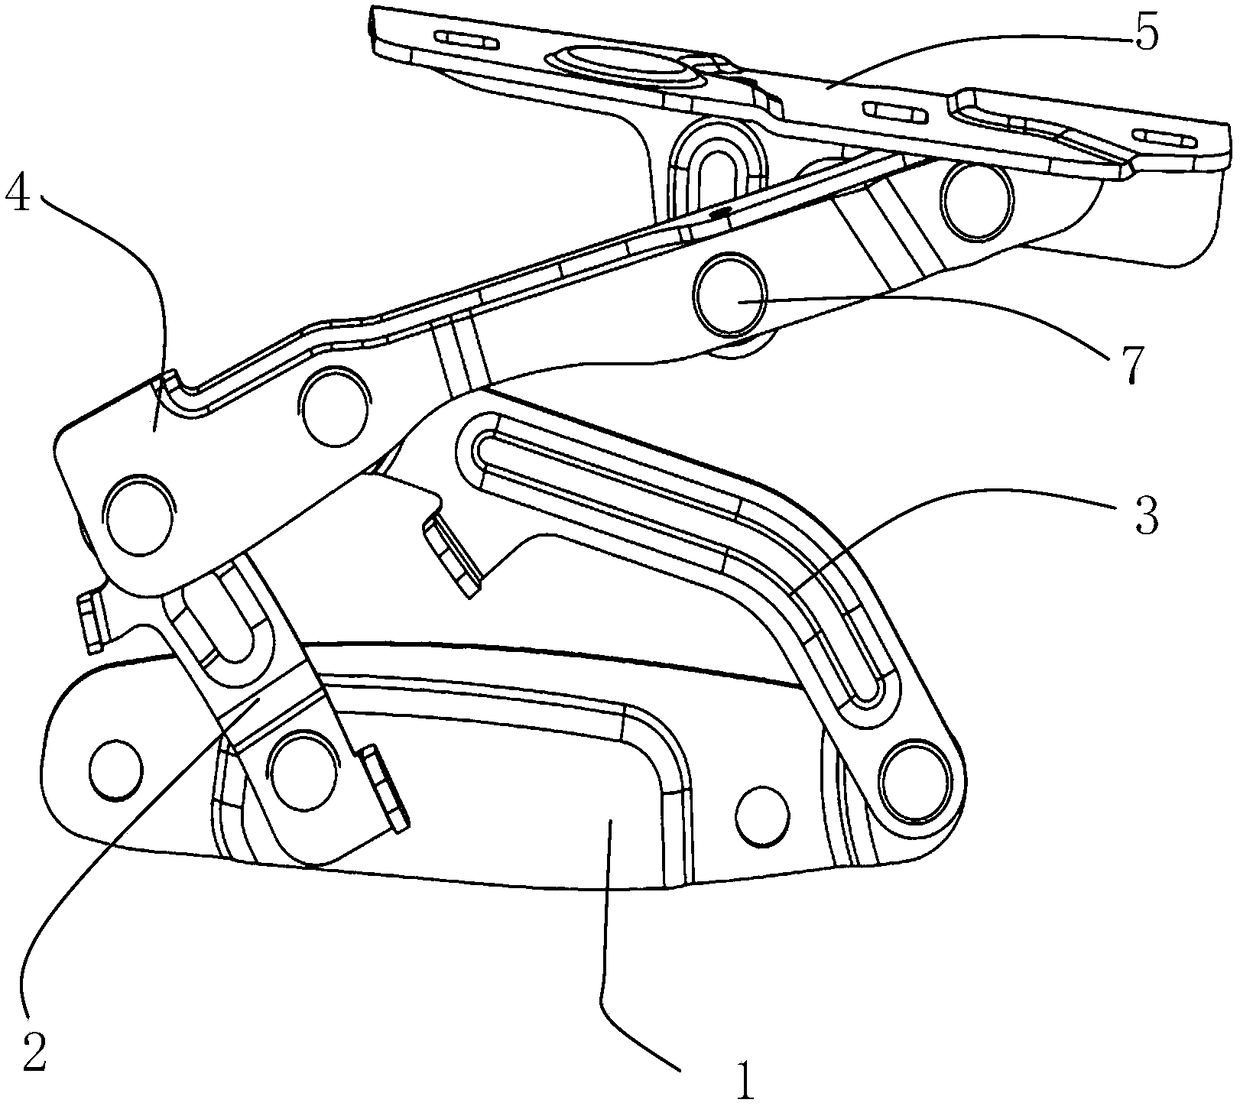 Five-connecting rod hinge structure of active pedestrian protection engine cover